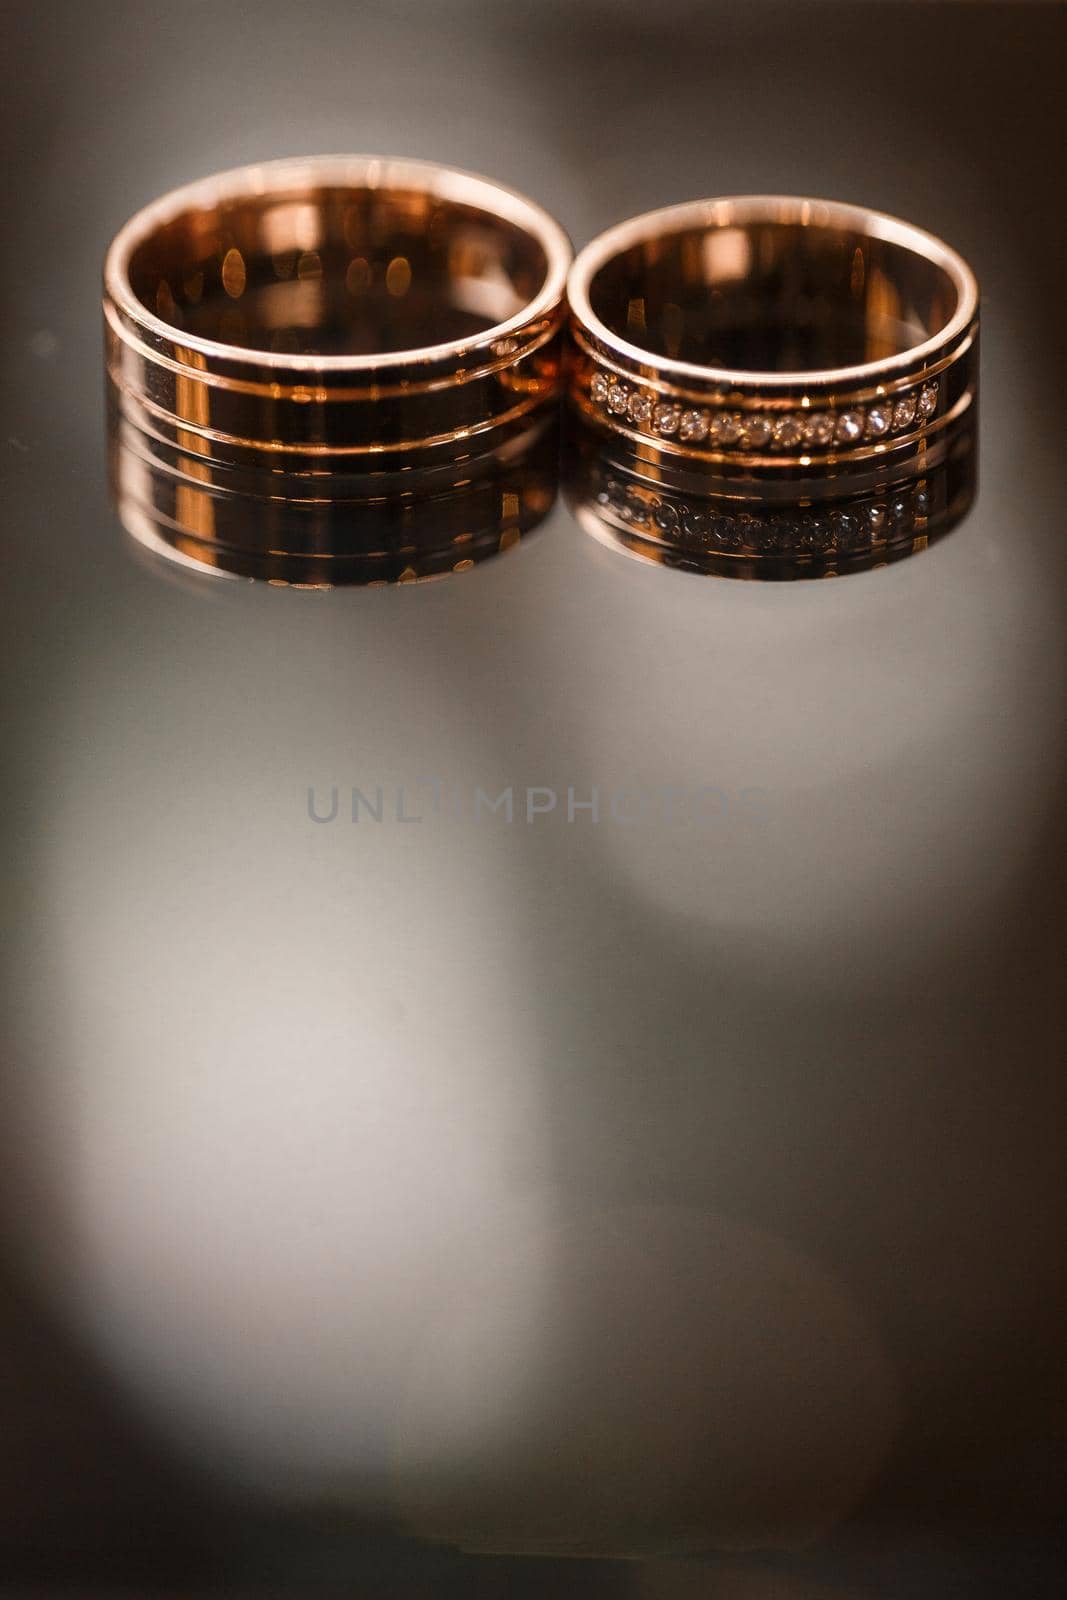 Gold wedding rings for newlyweds on their wedding day. Jewelry for the holiday of a couple in love